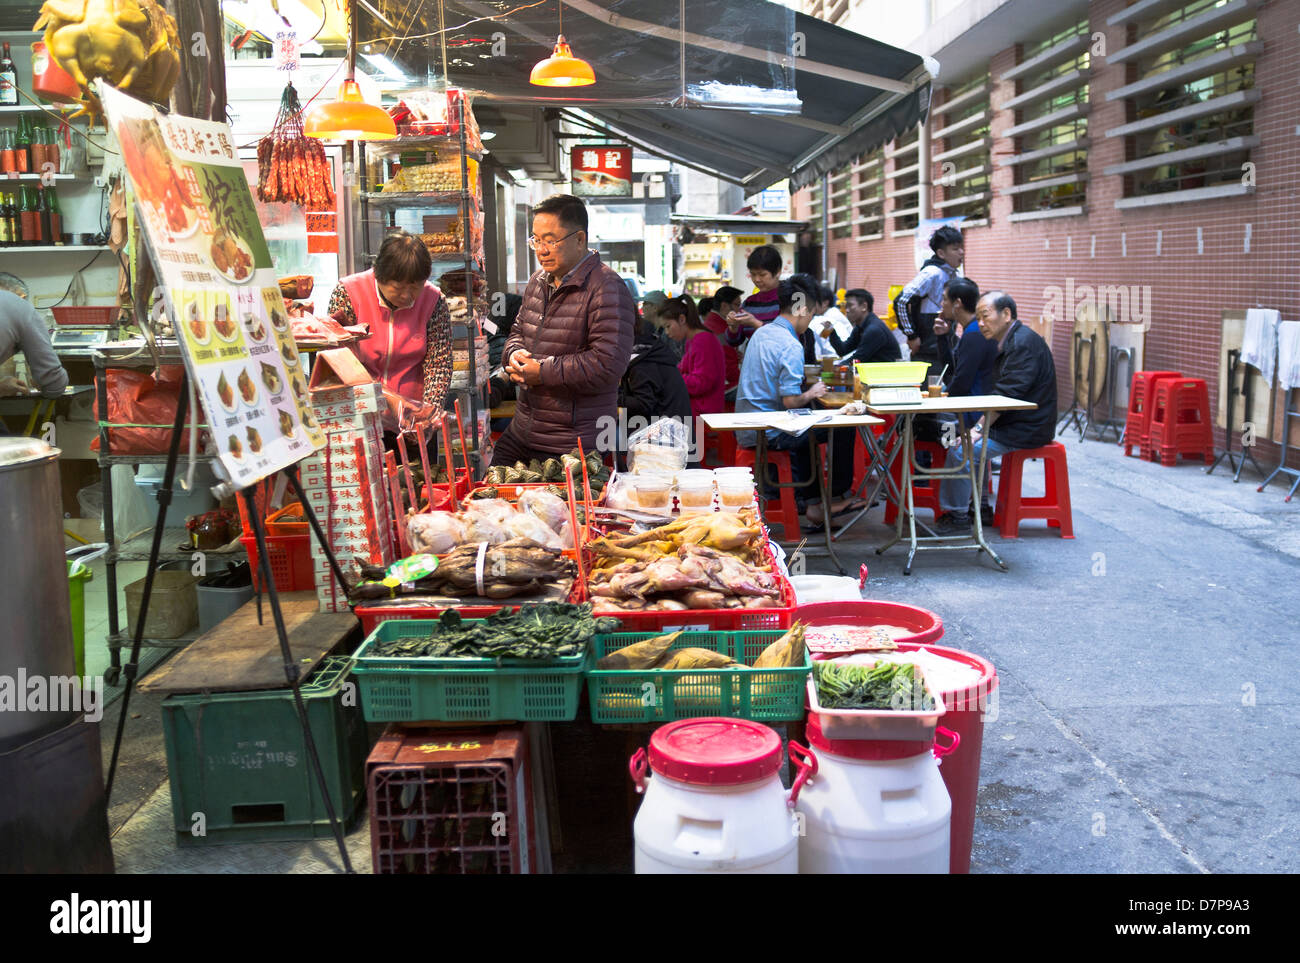 dh  CAUSEWAY BAY HONG KONG Street cafe Chinese eating outdoors backstreet food market asia china alley people dining cantonese locals Stock Photo